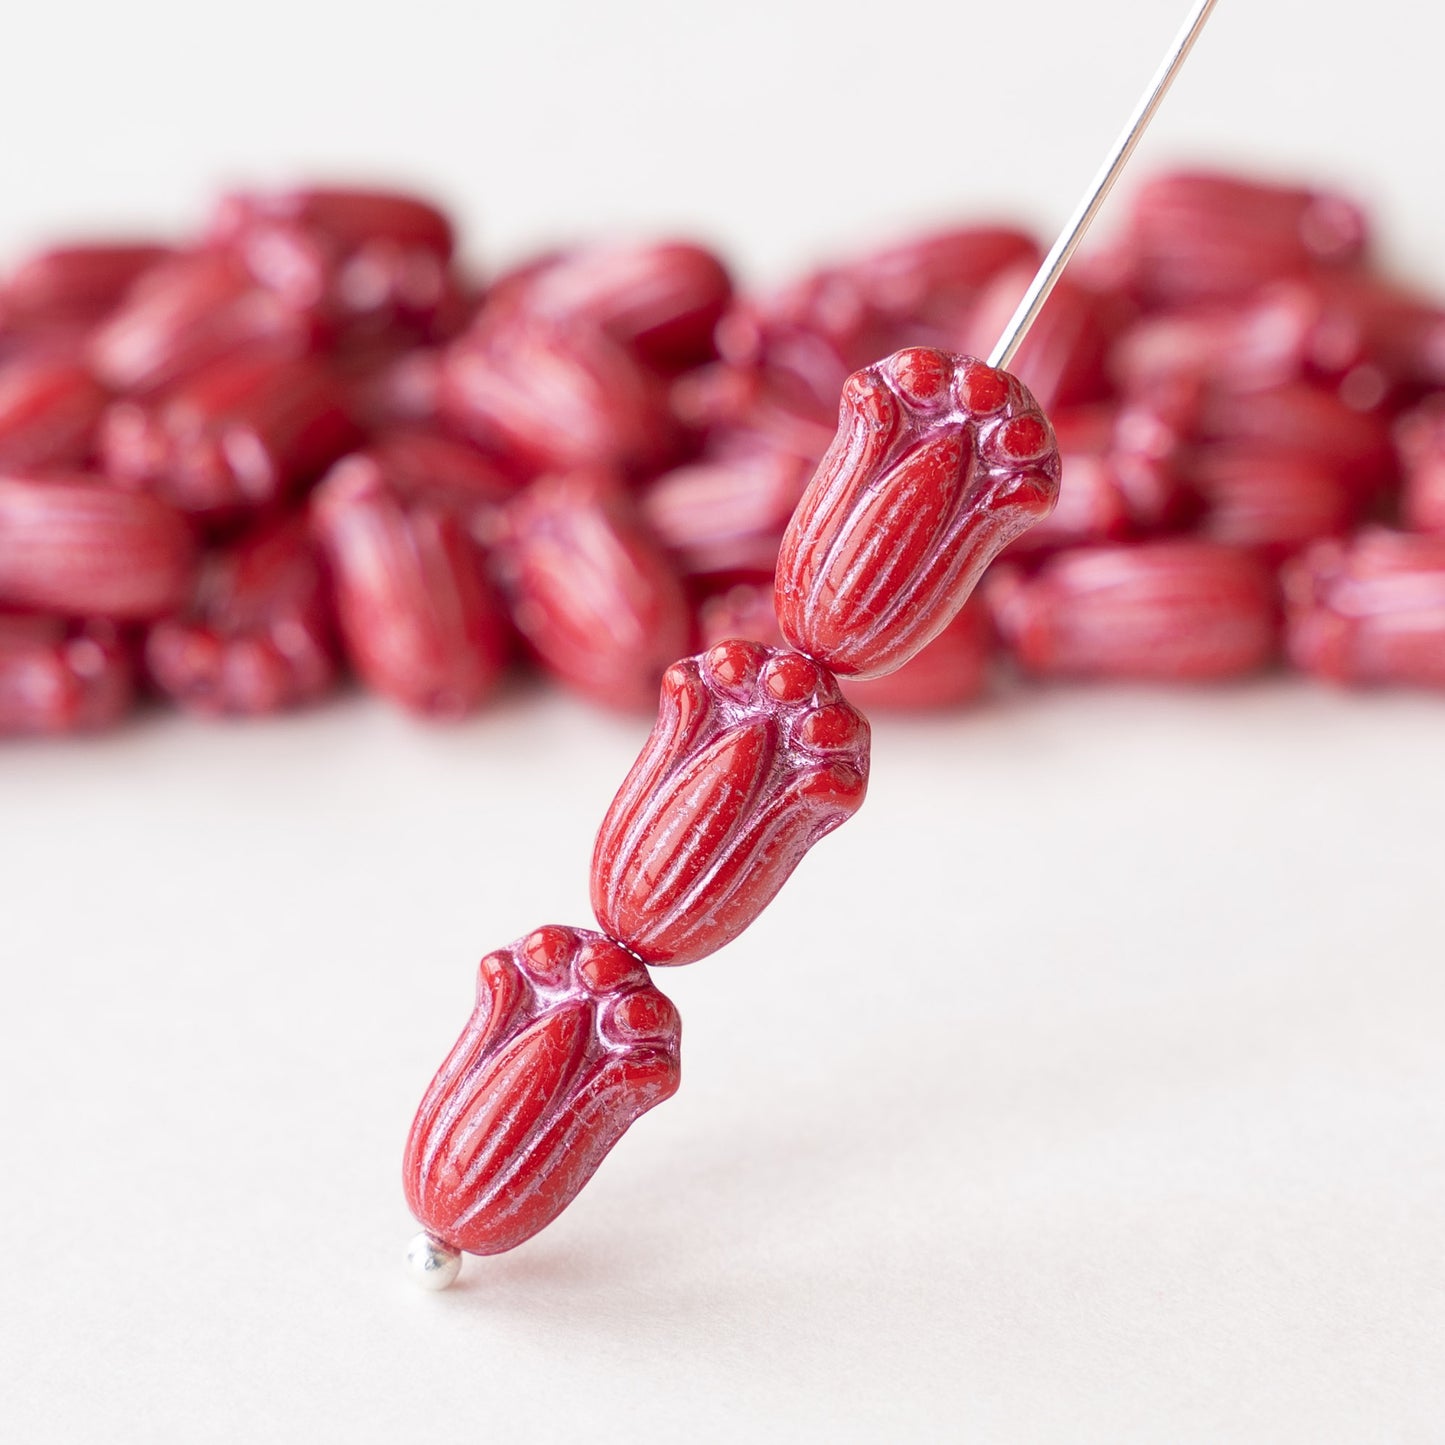 Load image into Gallery viewer, 12mm Glass Tulip Beads - Red with Pink Wash - 10 Beads
